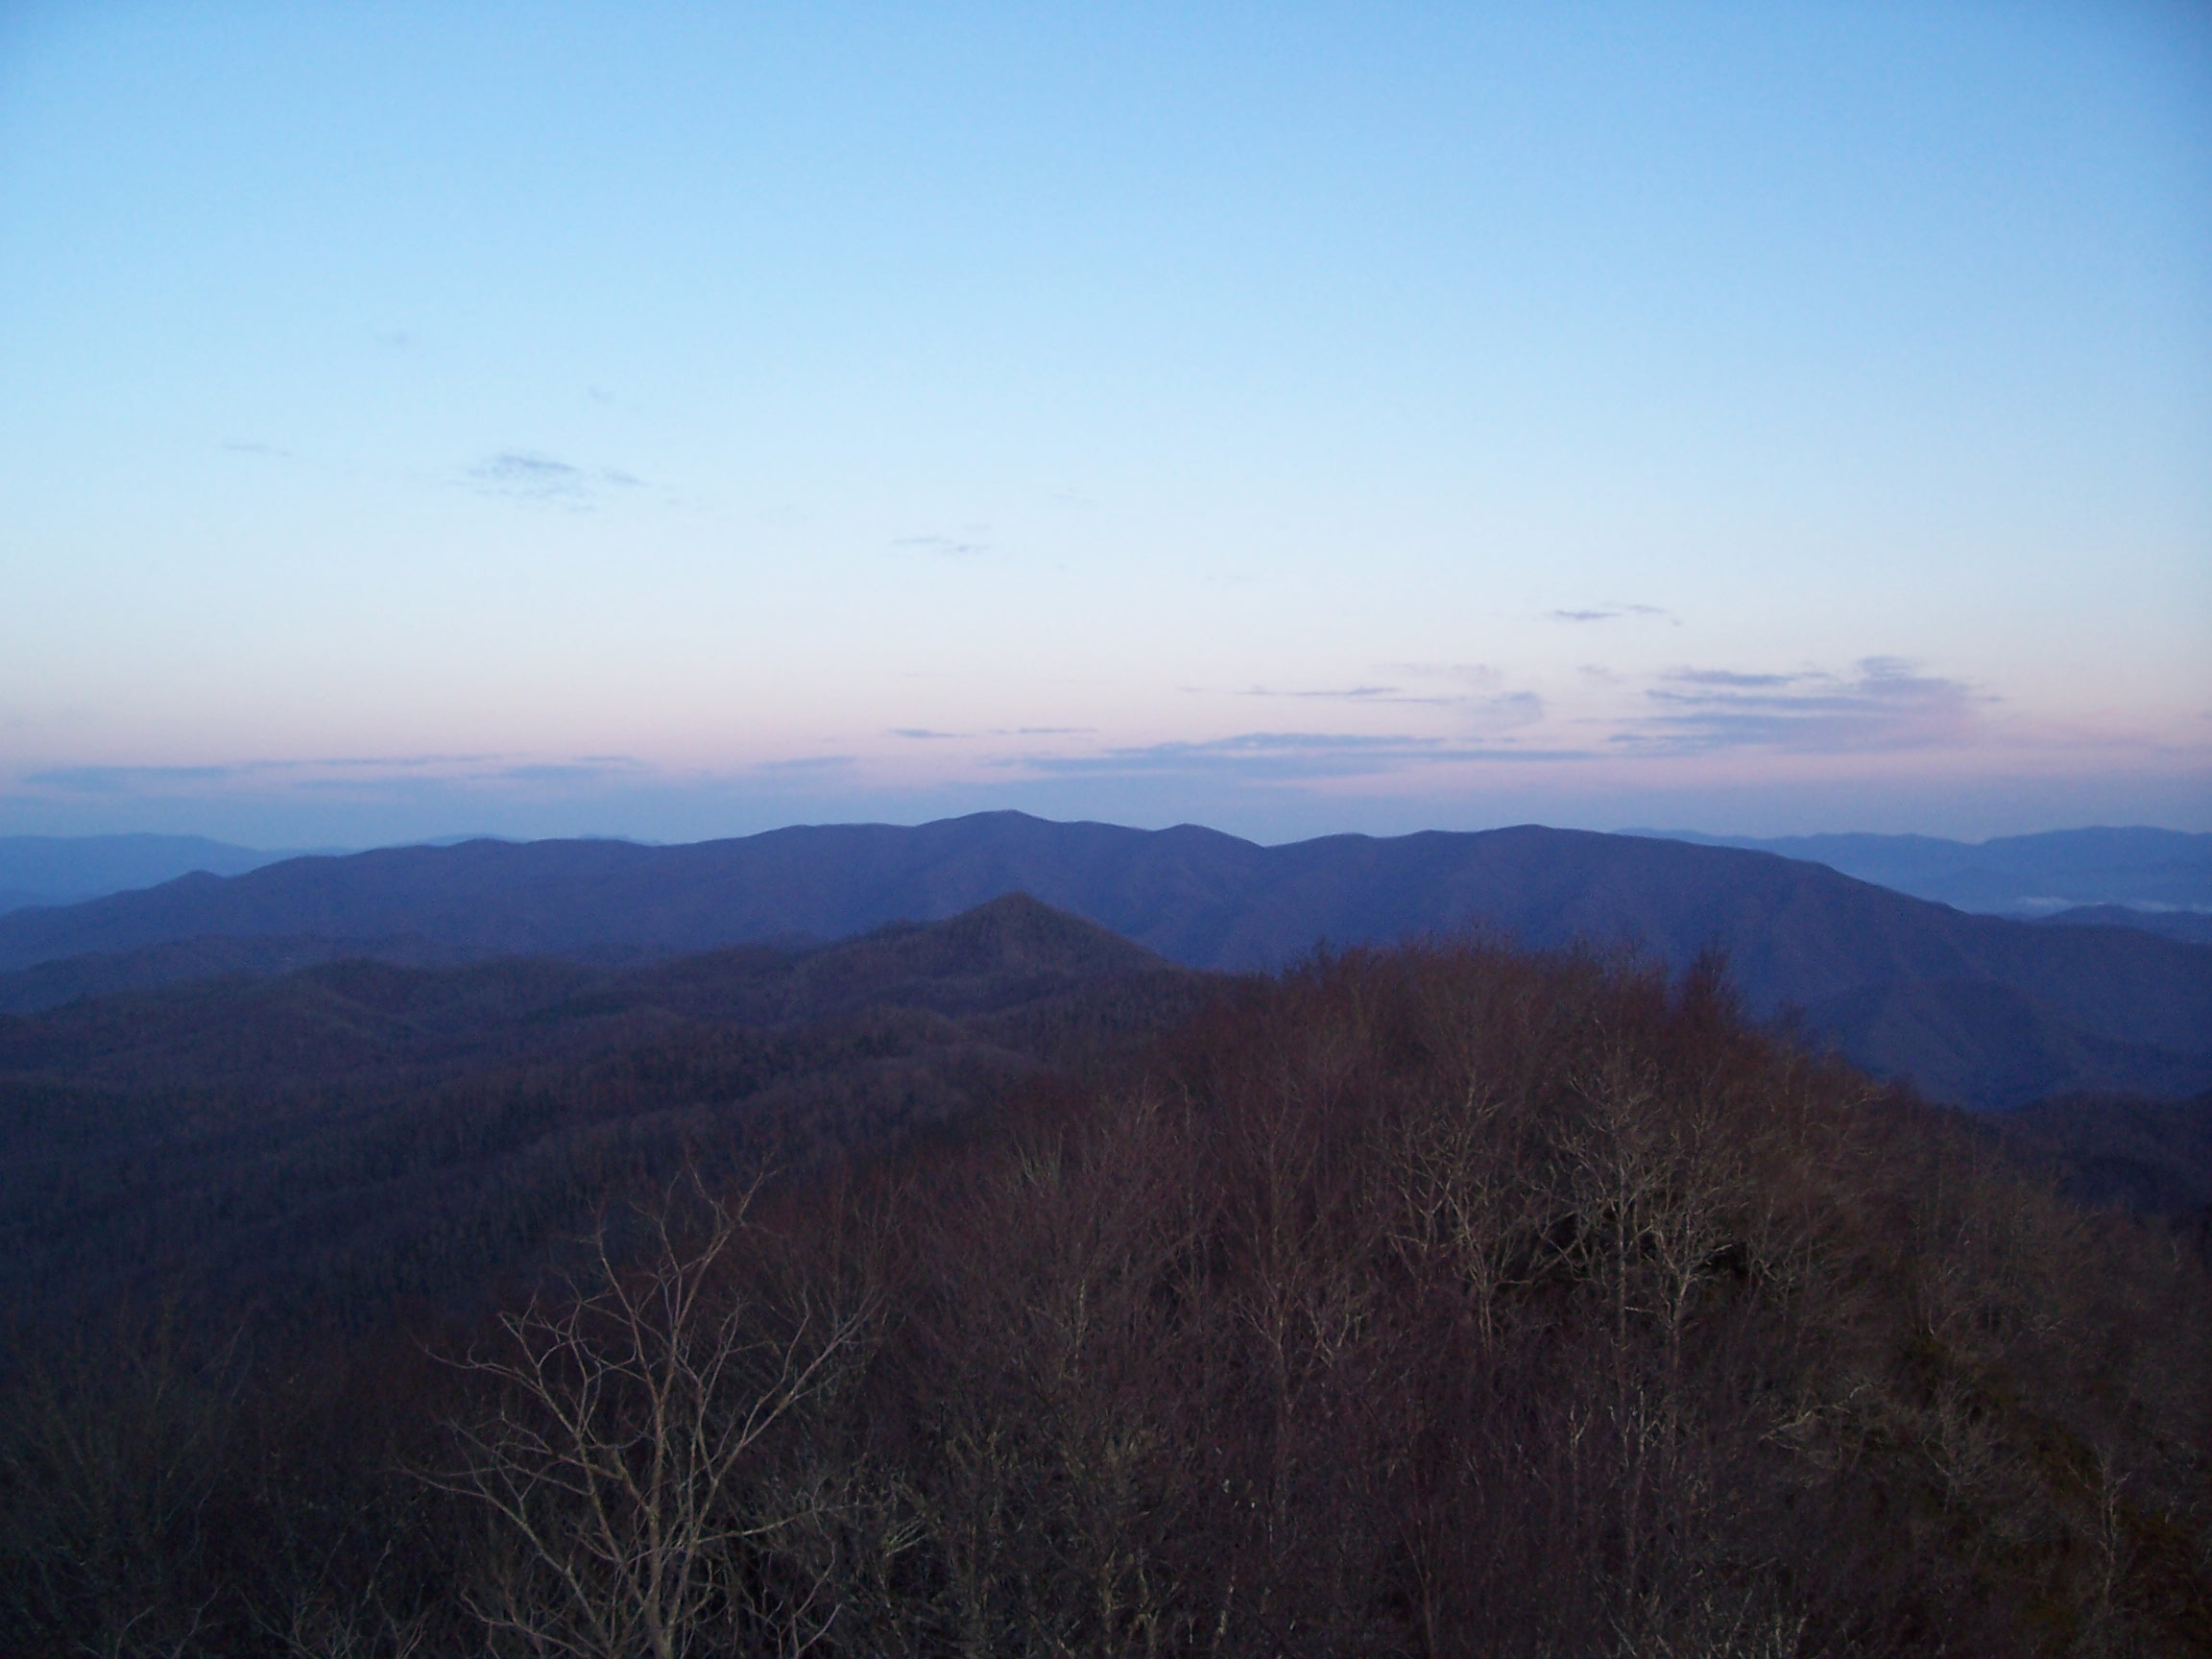 mm 6.5 - Early morning sunrise pic of Clingman's Dome taken from Wesser Bald Tower Mar 2006. Courtesy willey54@yahoo.com